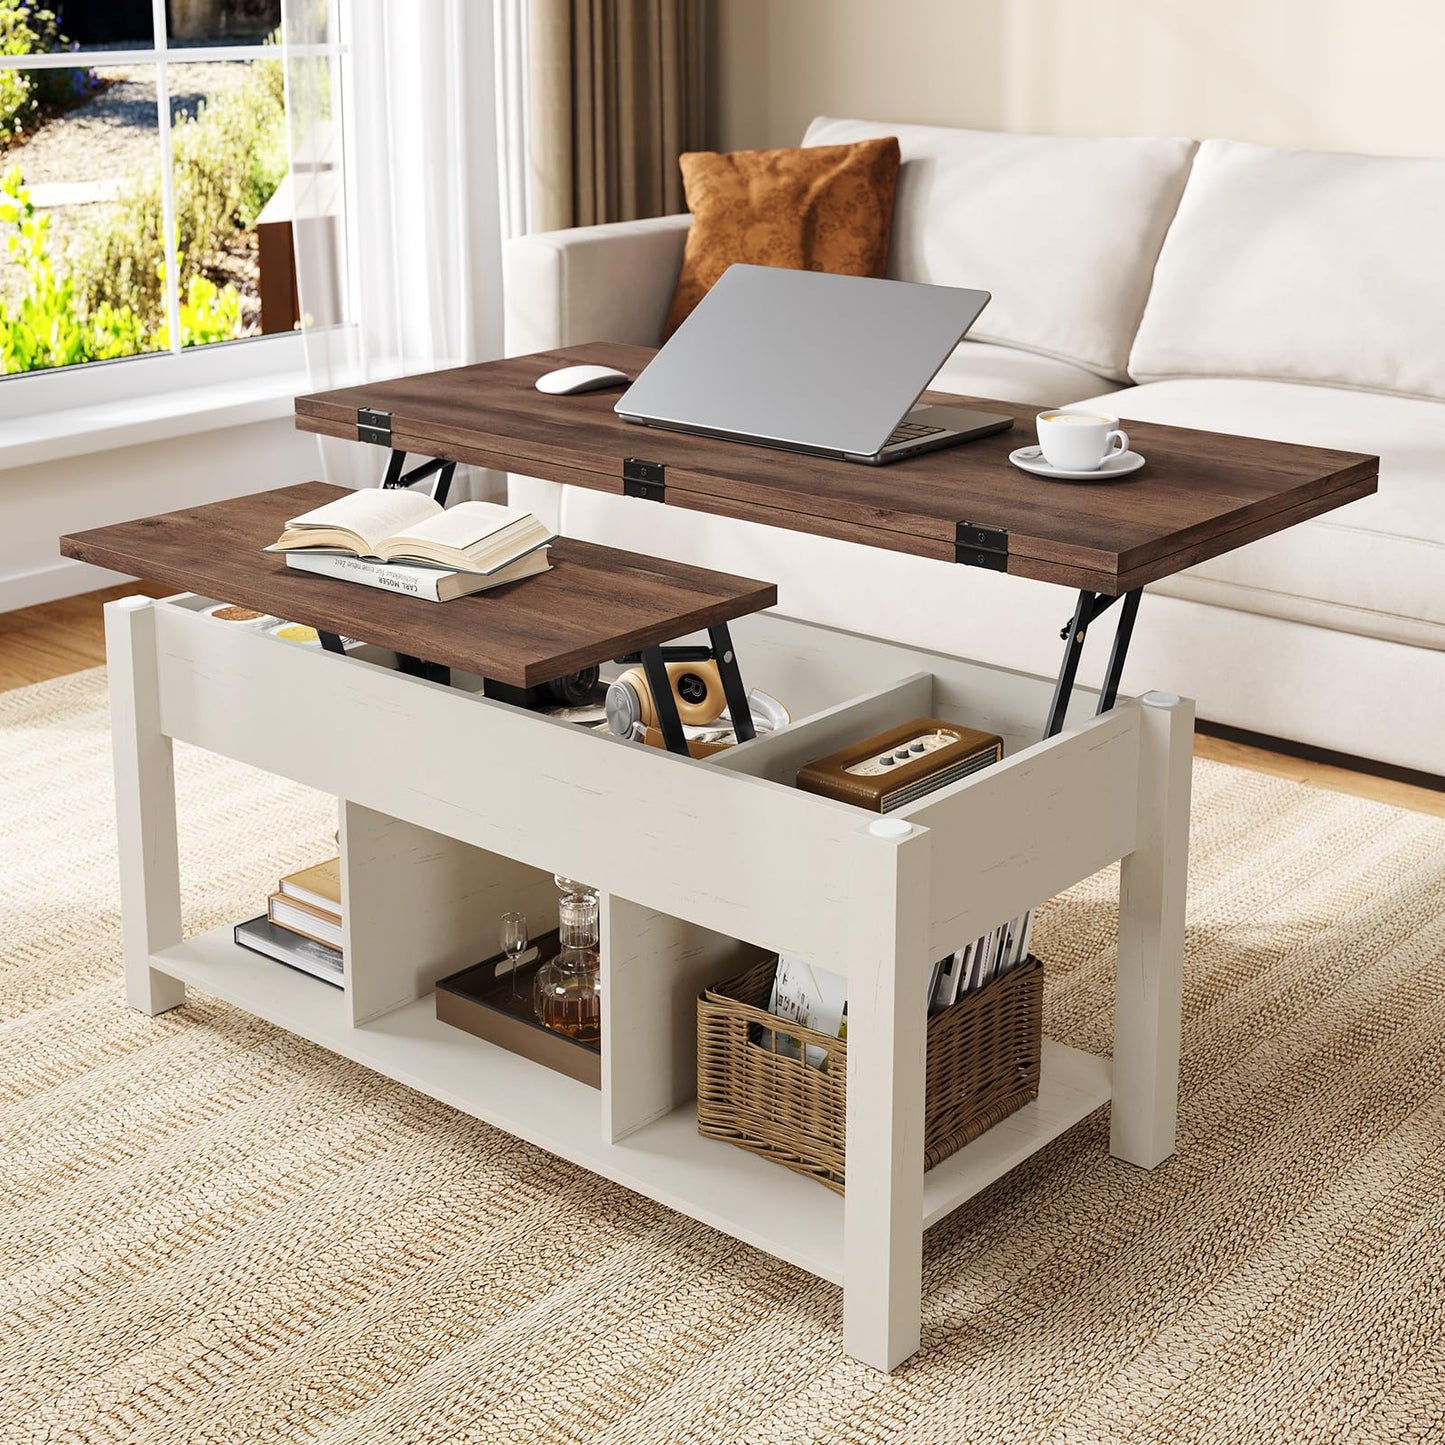 UPOSOJA Lift Top Coffee Table for Living Room, 4 in 1 Coffee Table with Storage, Modern Farmhouse Wood Coffee Tables with Hidden Compartments and Open Shelf (Old White)